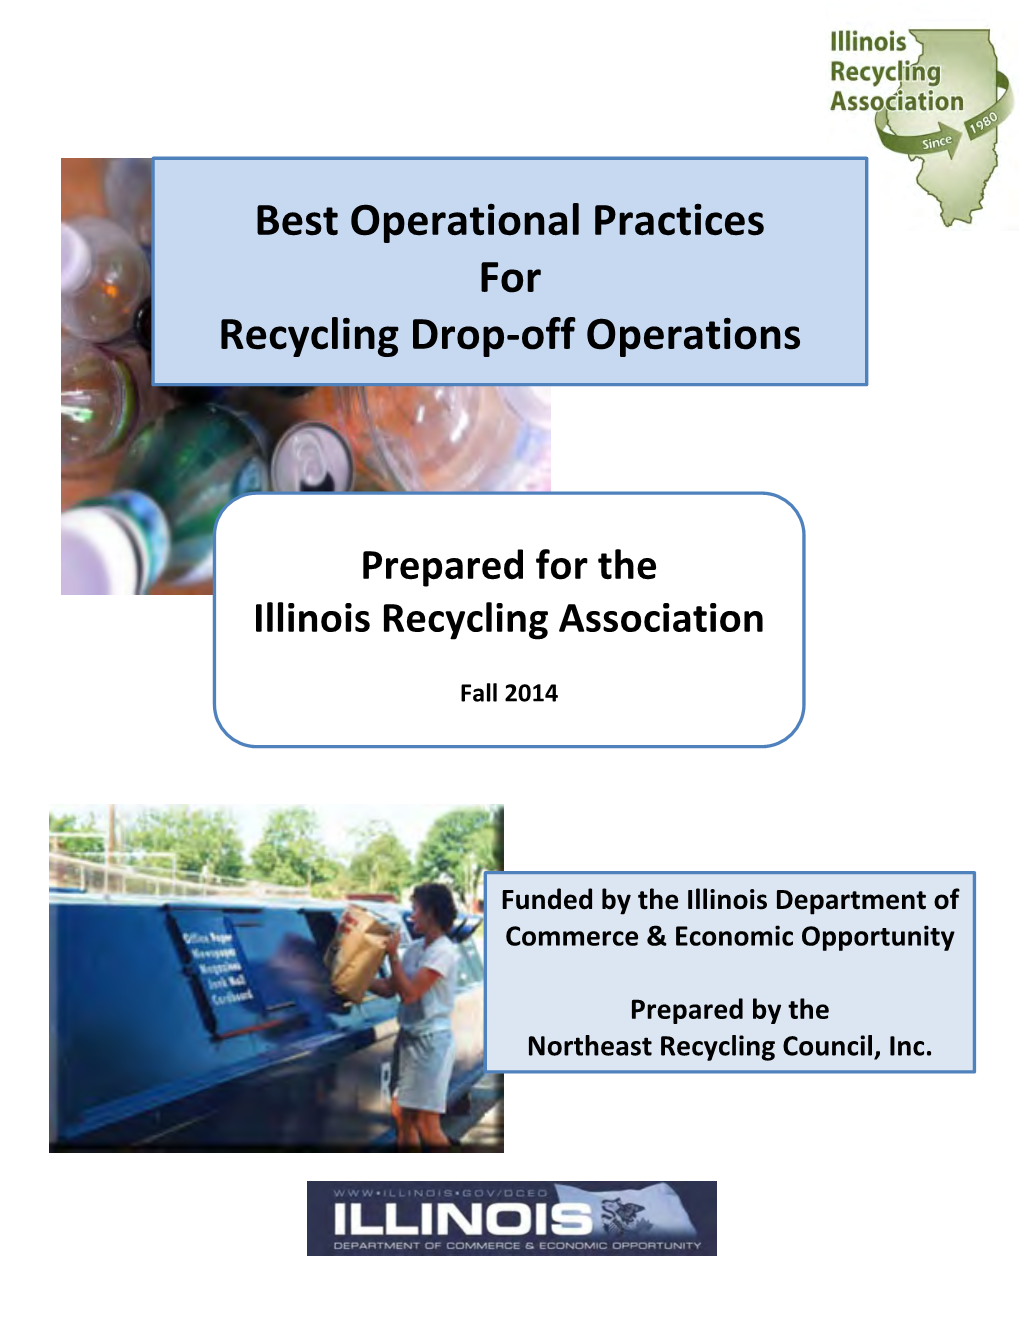 Best Operational Practices for Recycling Drop-Off Operations